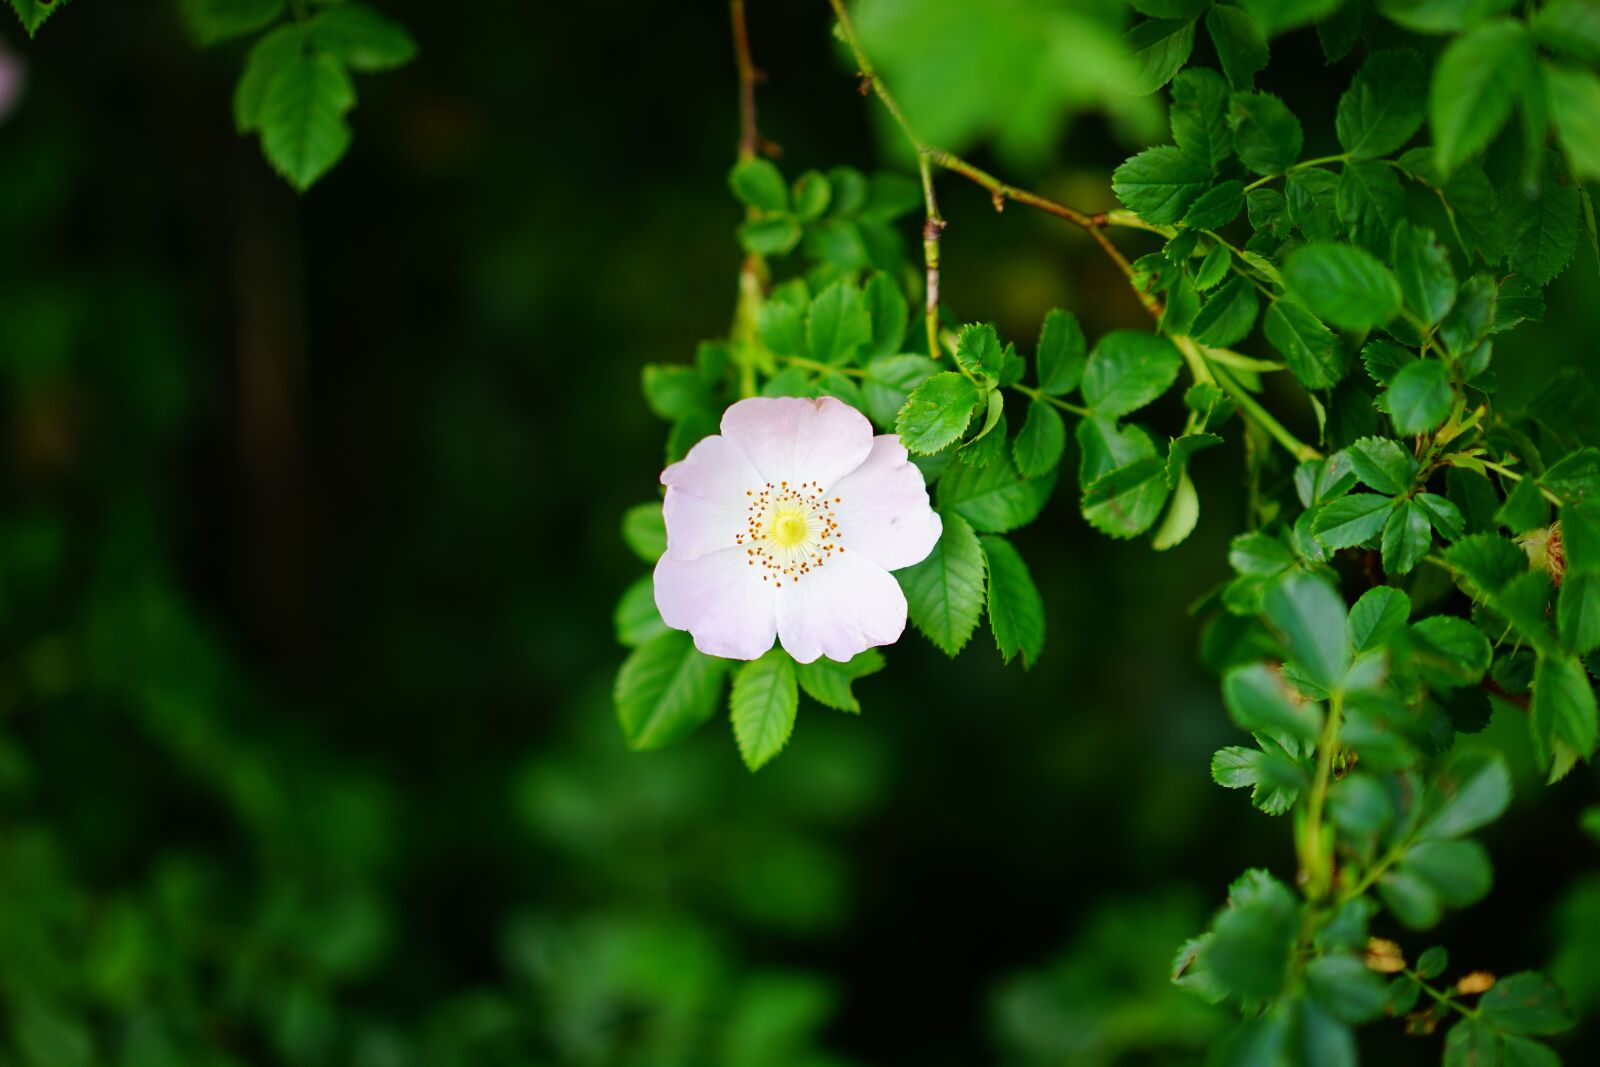 Sony a7 sample photo. Dog rose, rose bloom photography